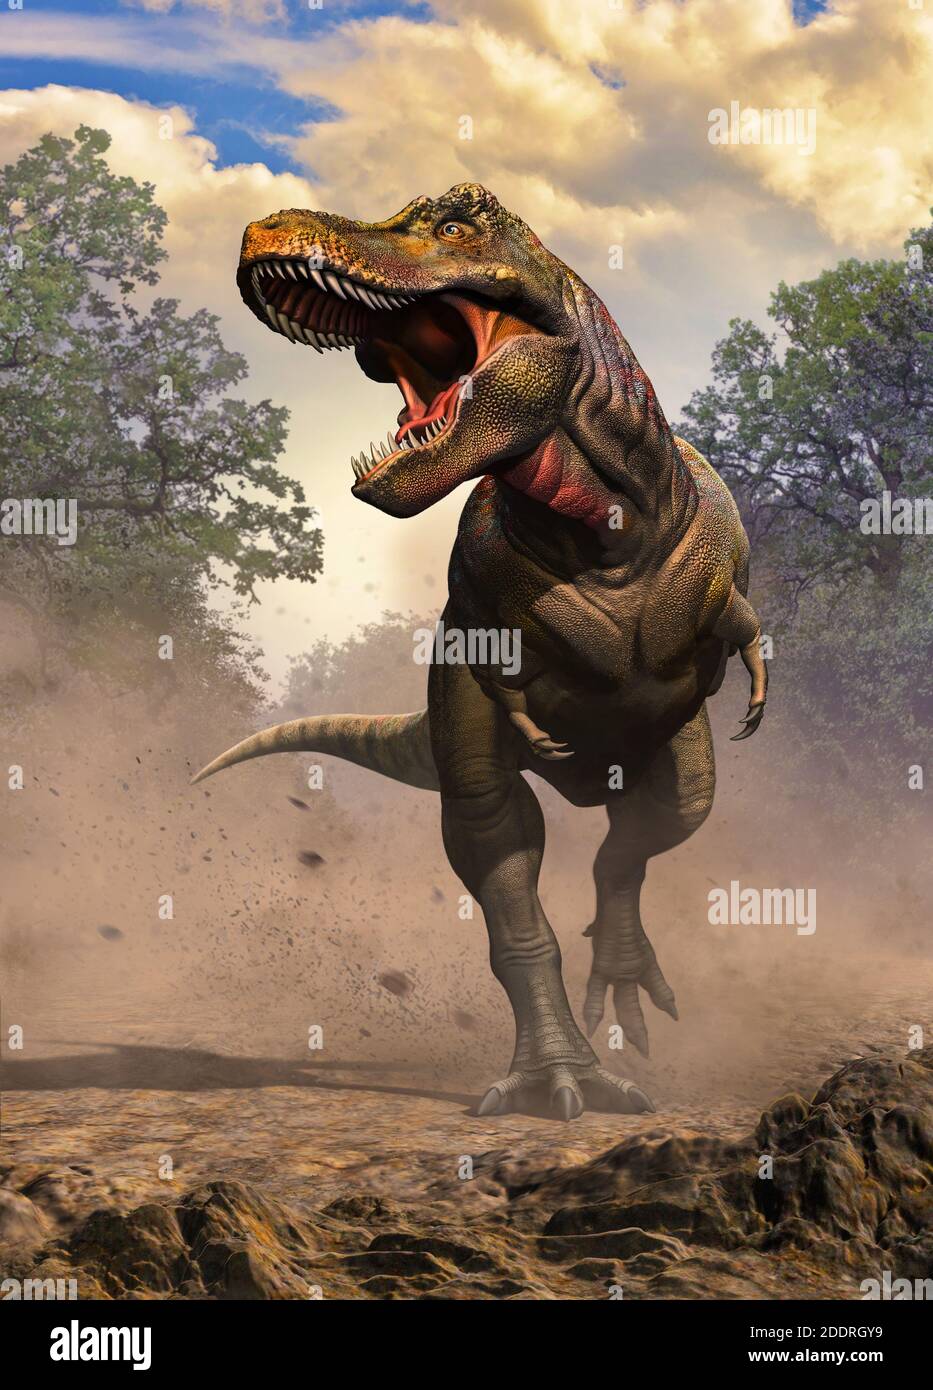 Zhuchengtyrannus magnus running and roaring across a prehistoric environment from the Late Cretaceous period of Shandong Province, China Stock Photo